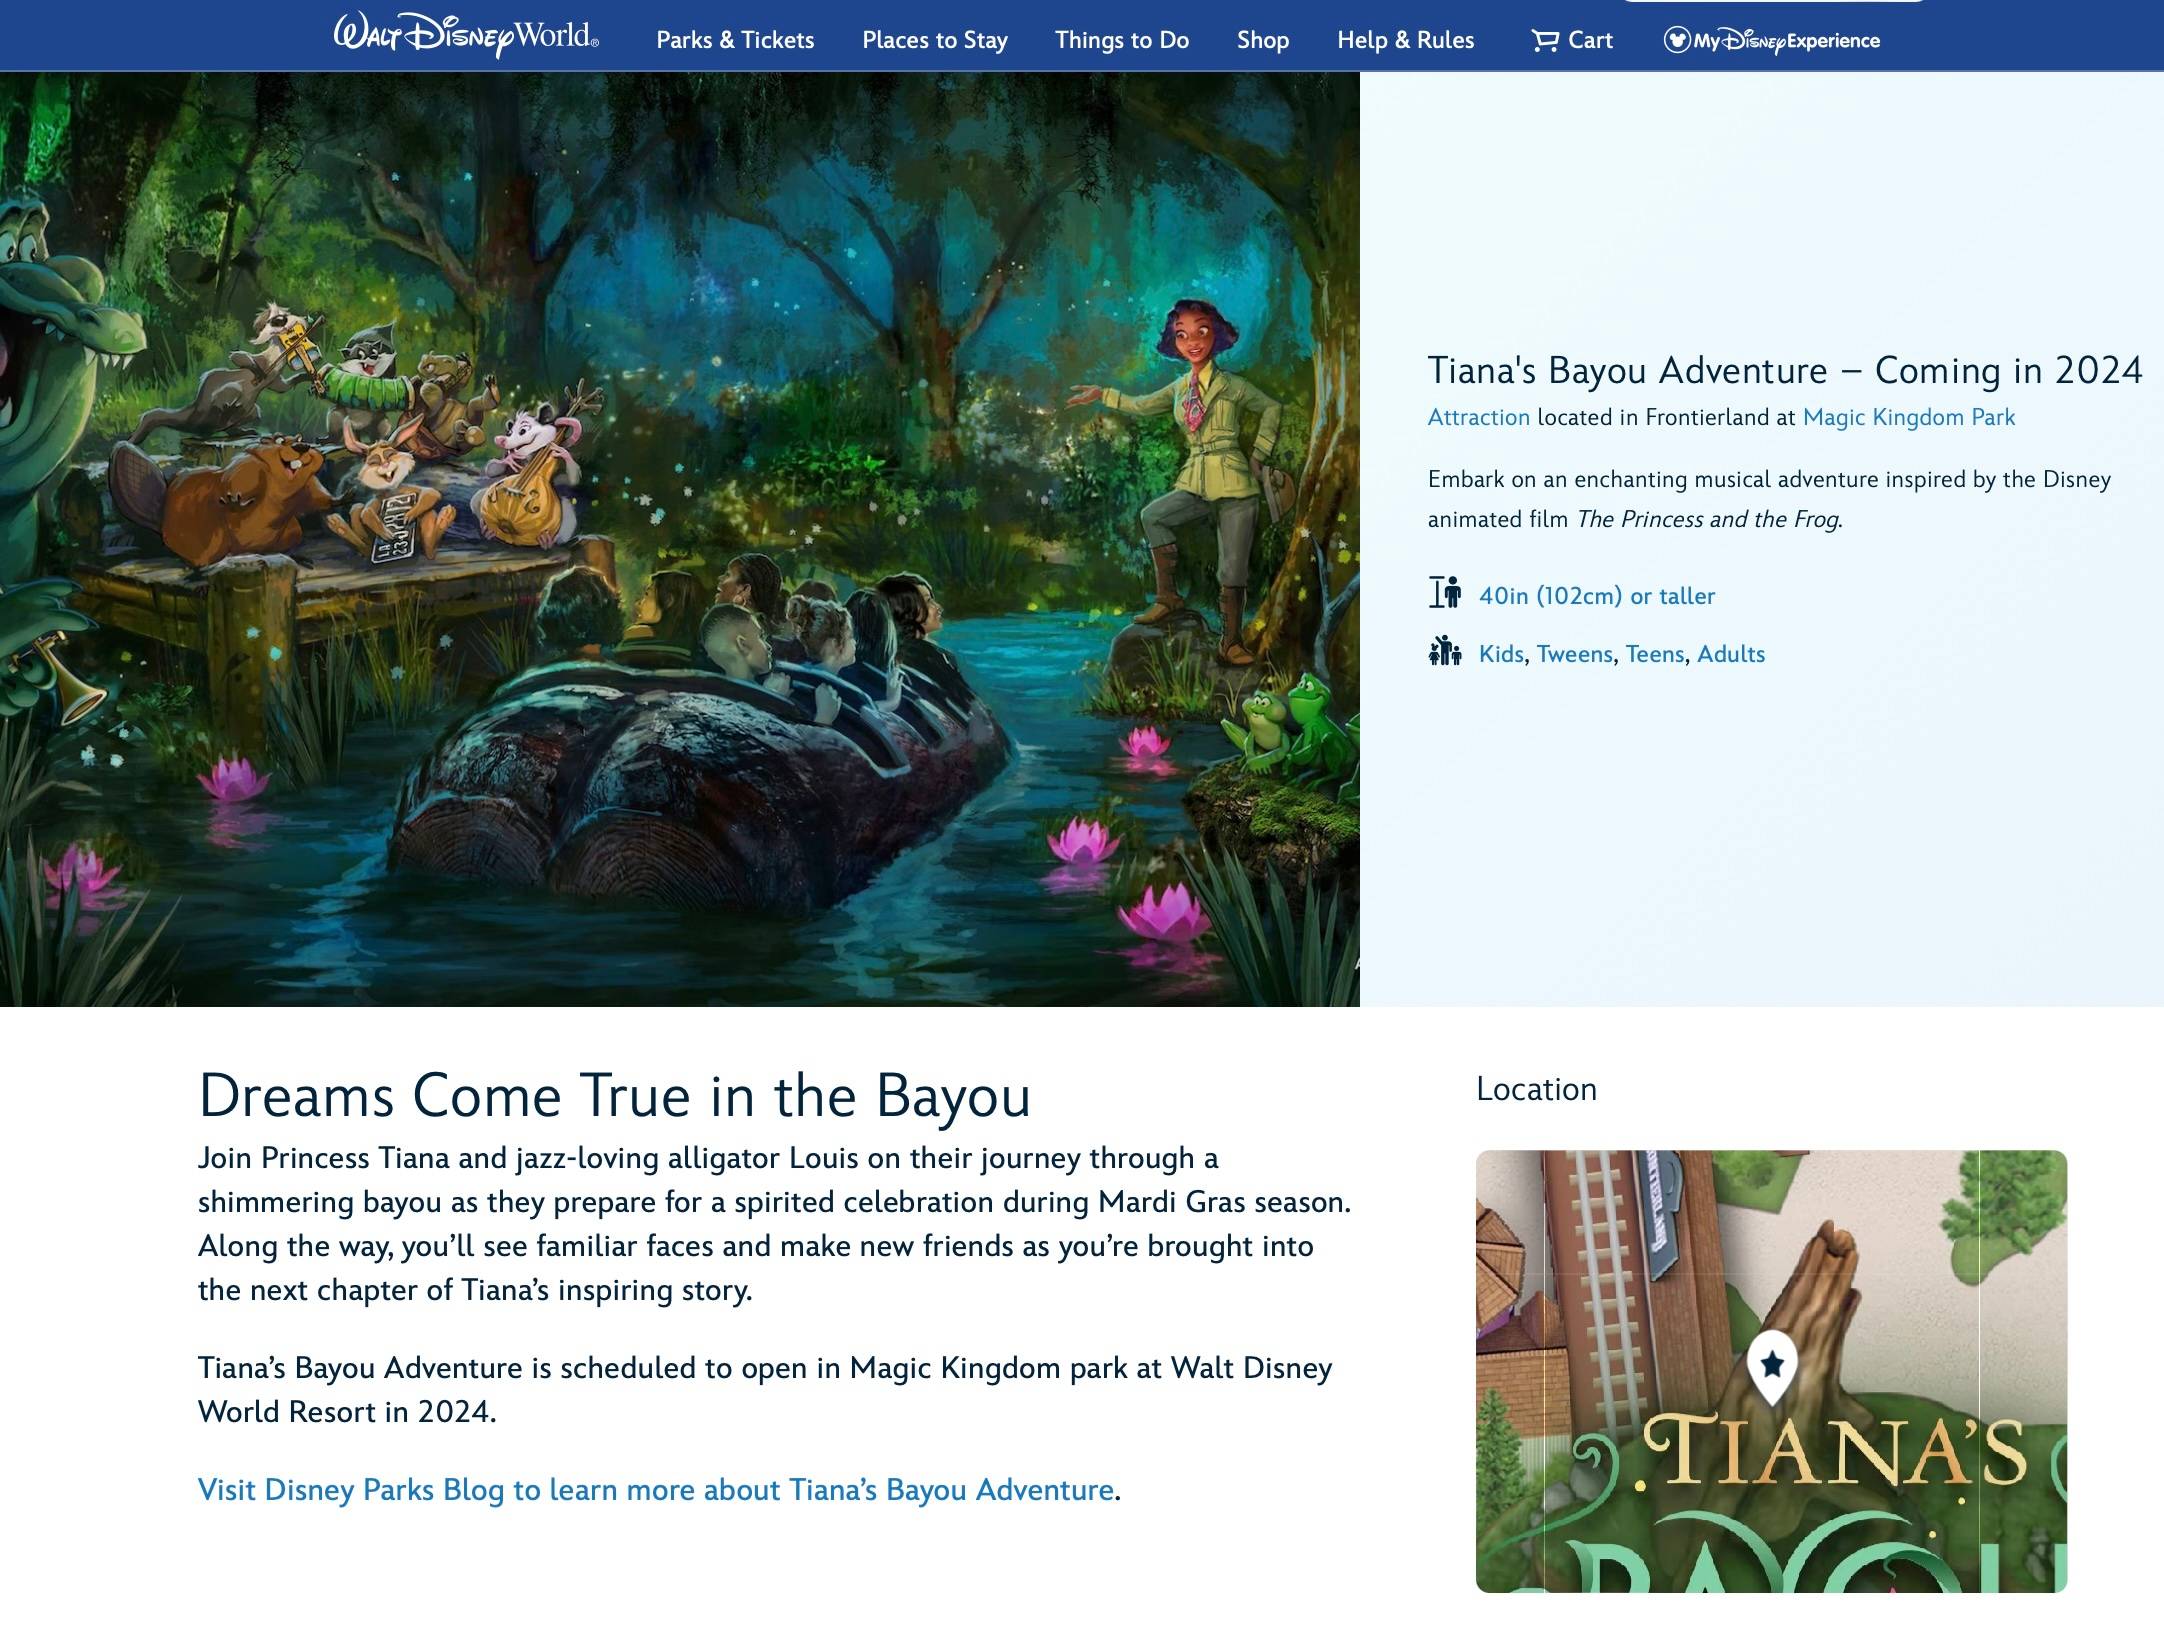 Tiana's Bayou Adventure web page on official Disney World website